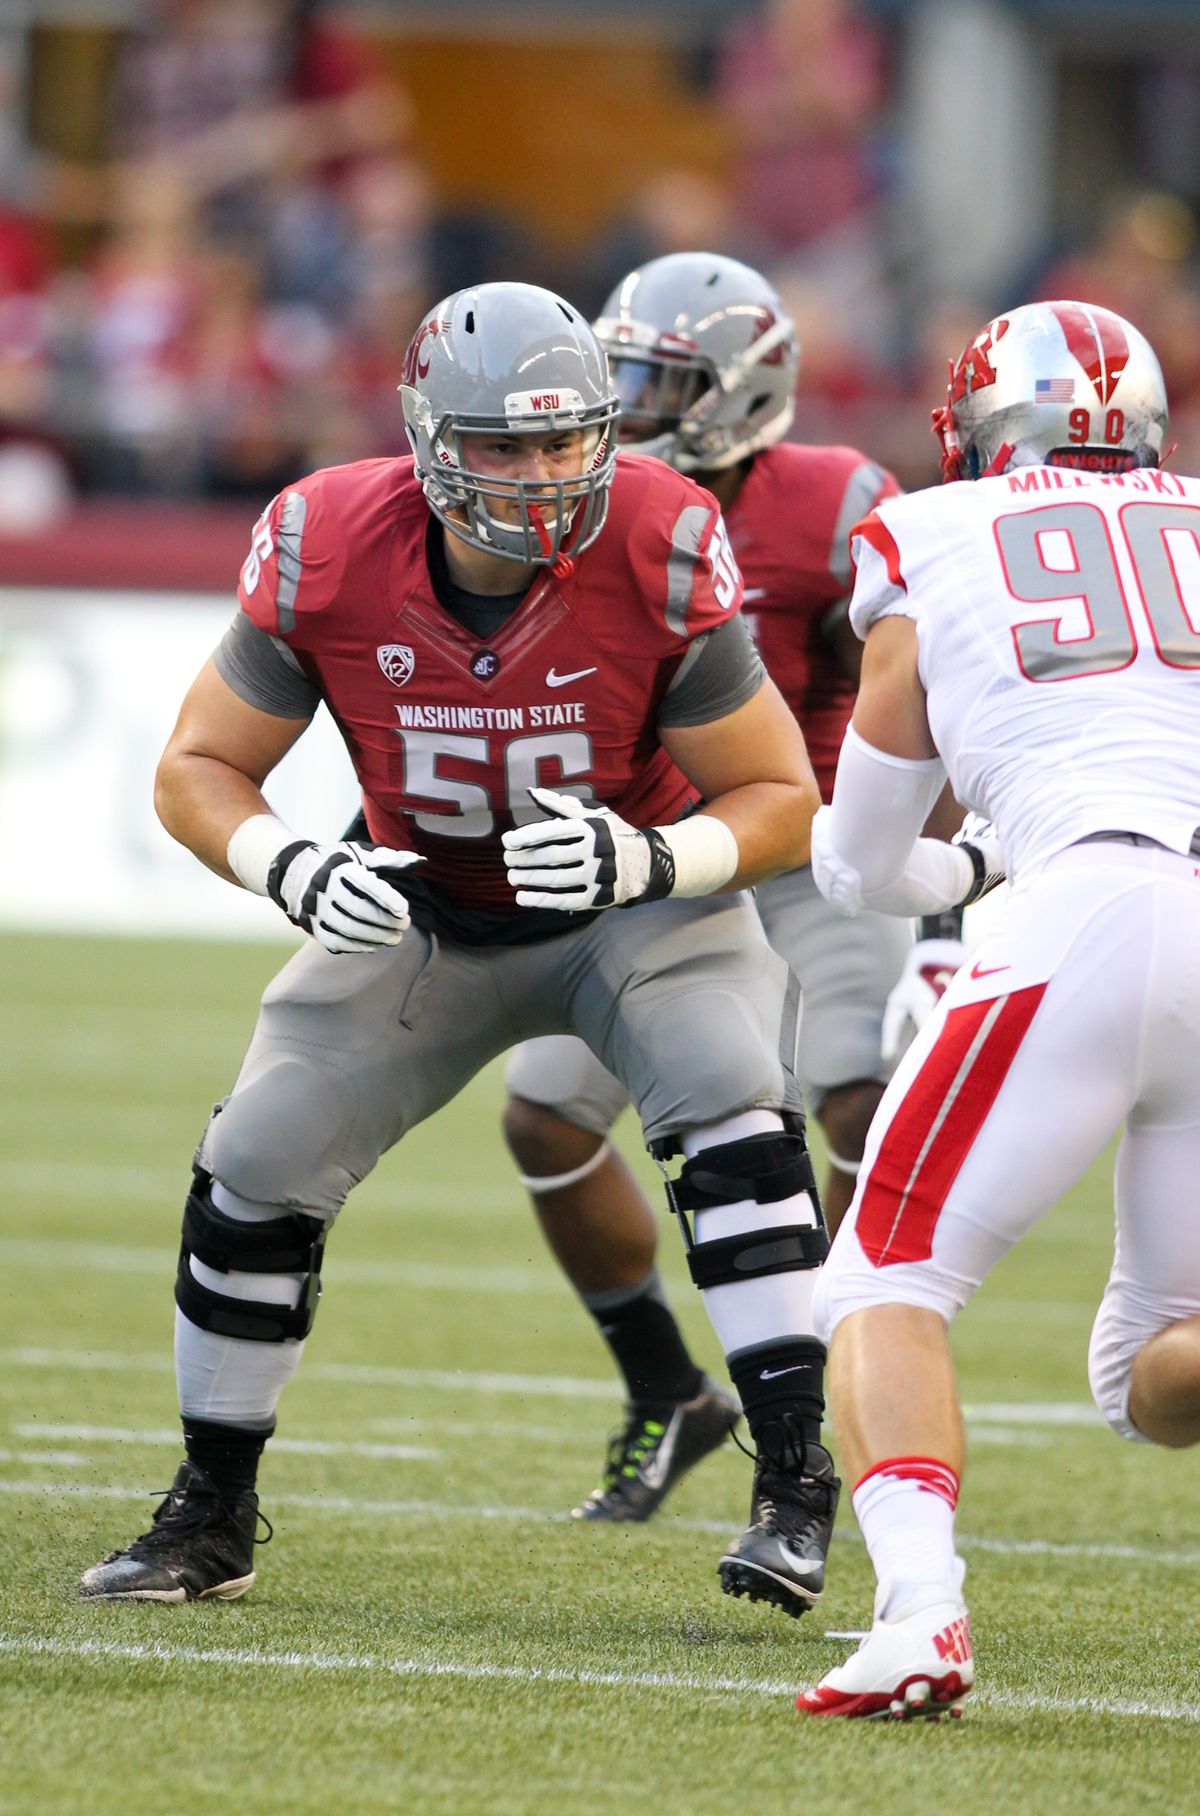 NFL draft analyst Rob Rang says WSU senior tackle Joe Dahl is quick and plays with “great knee bend.” (Associated Press)